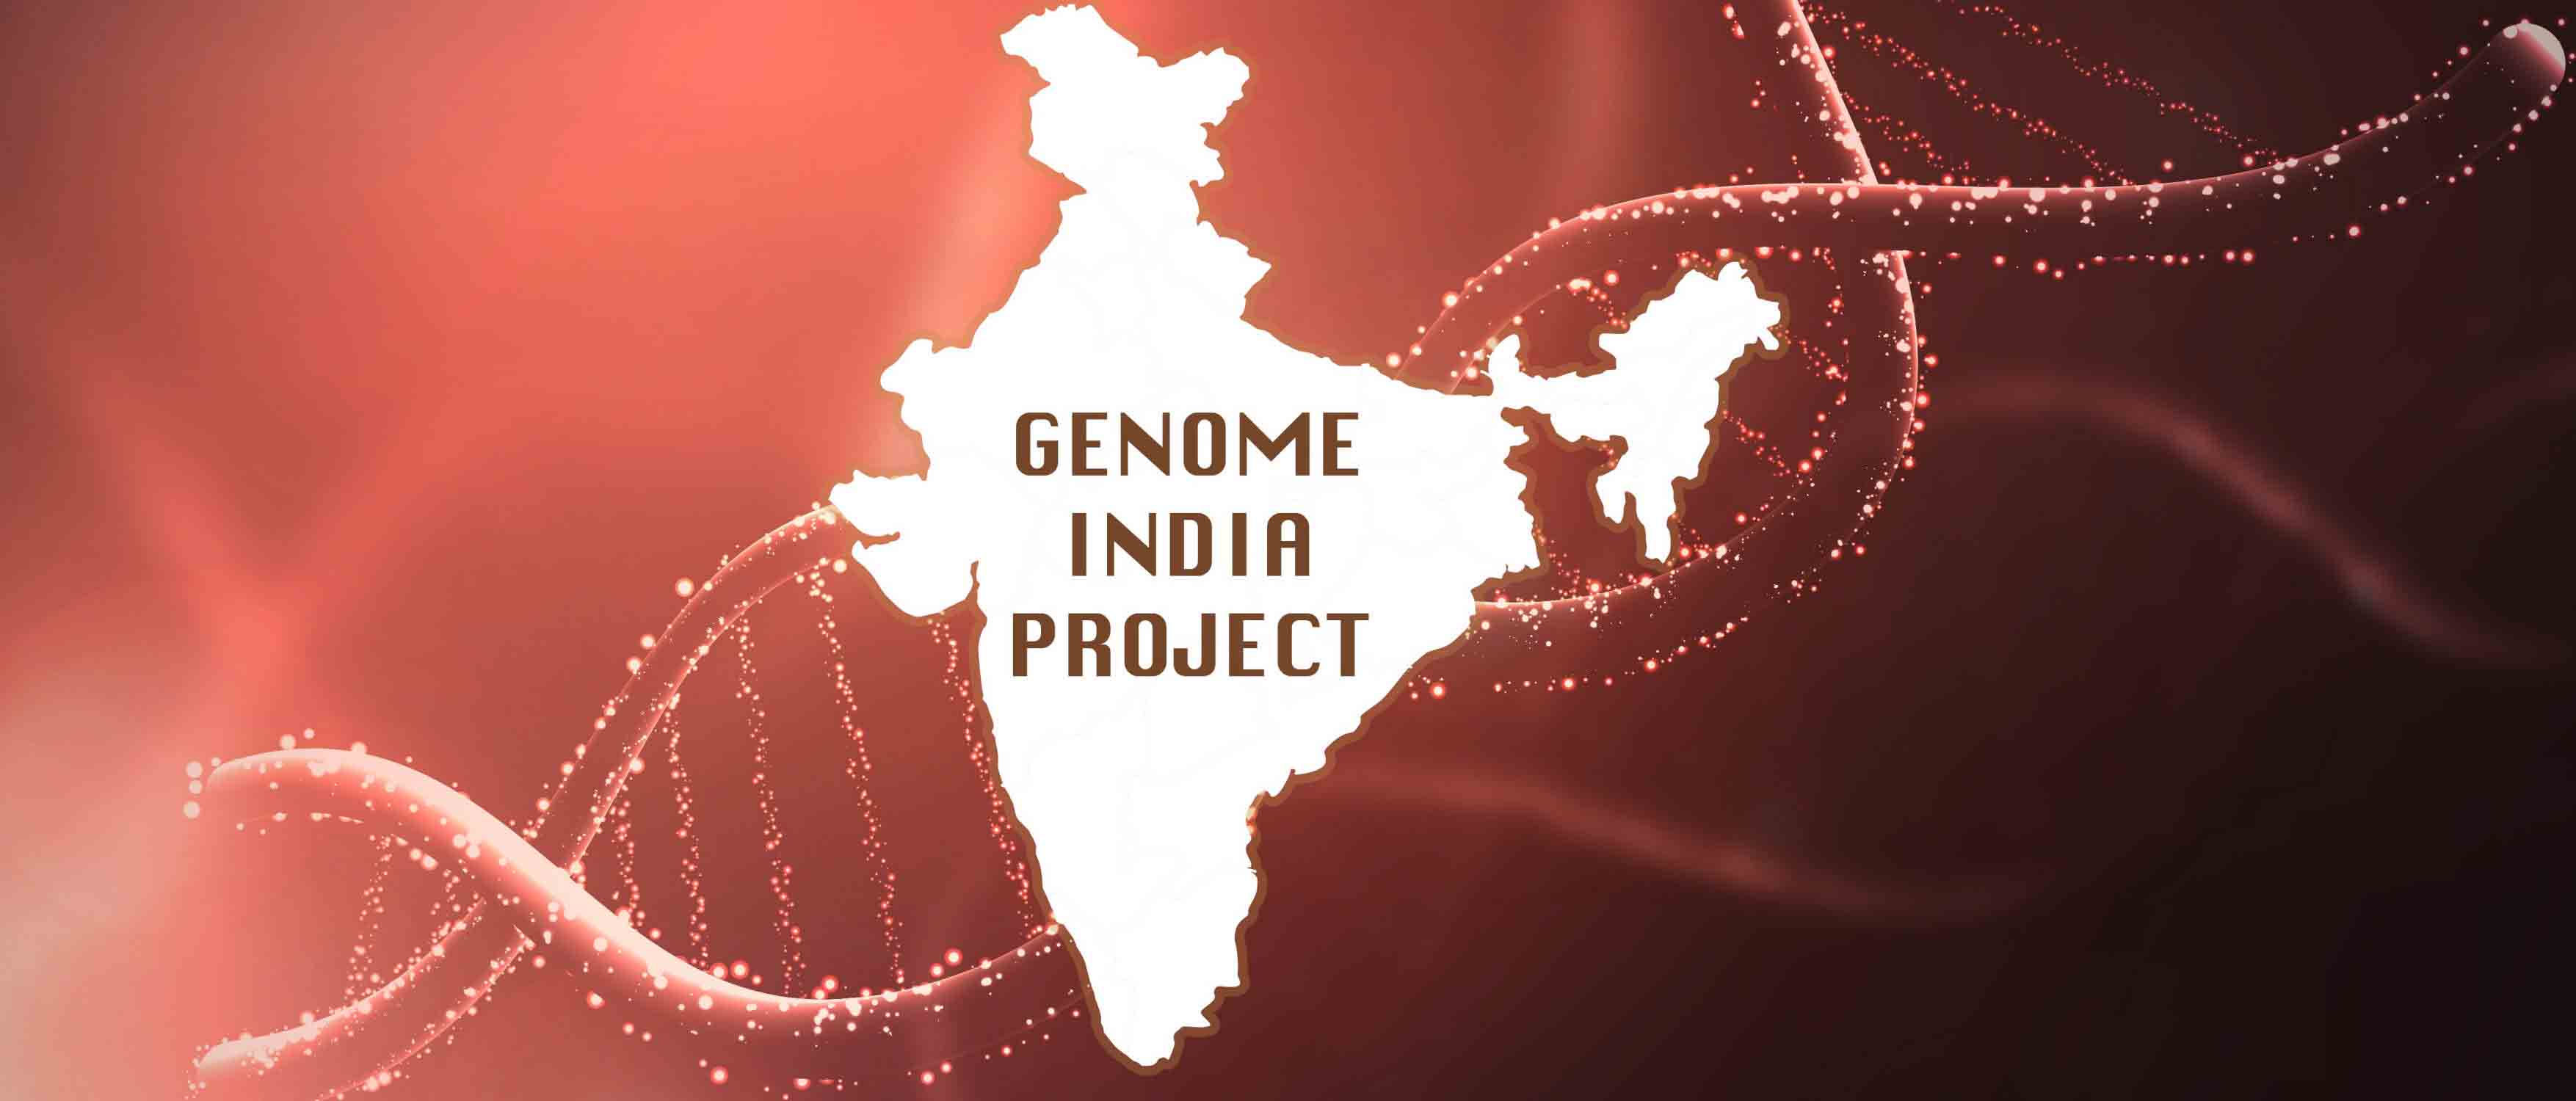 India Genome Sequencing: changing paradigms